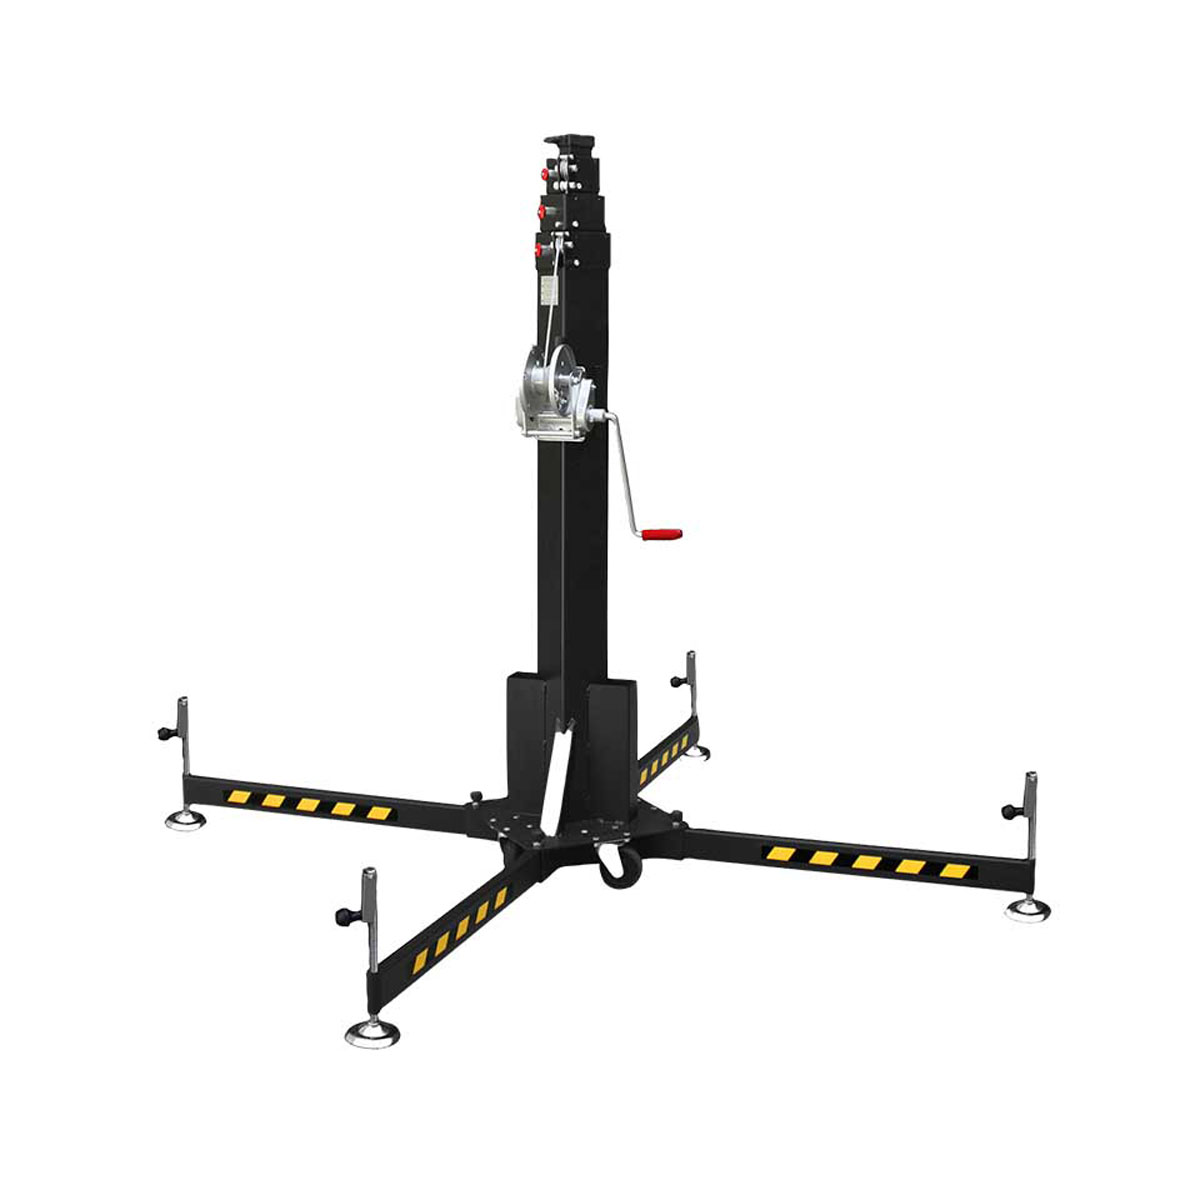 Buy Material Lifter - 5.20m by GUIL in Utility Lifters | Materials Handling Lift Towers from GUIL available at Astrolift NZ